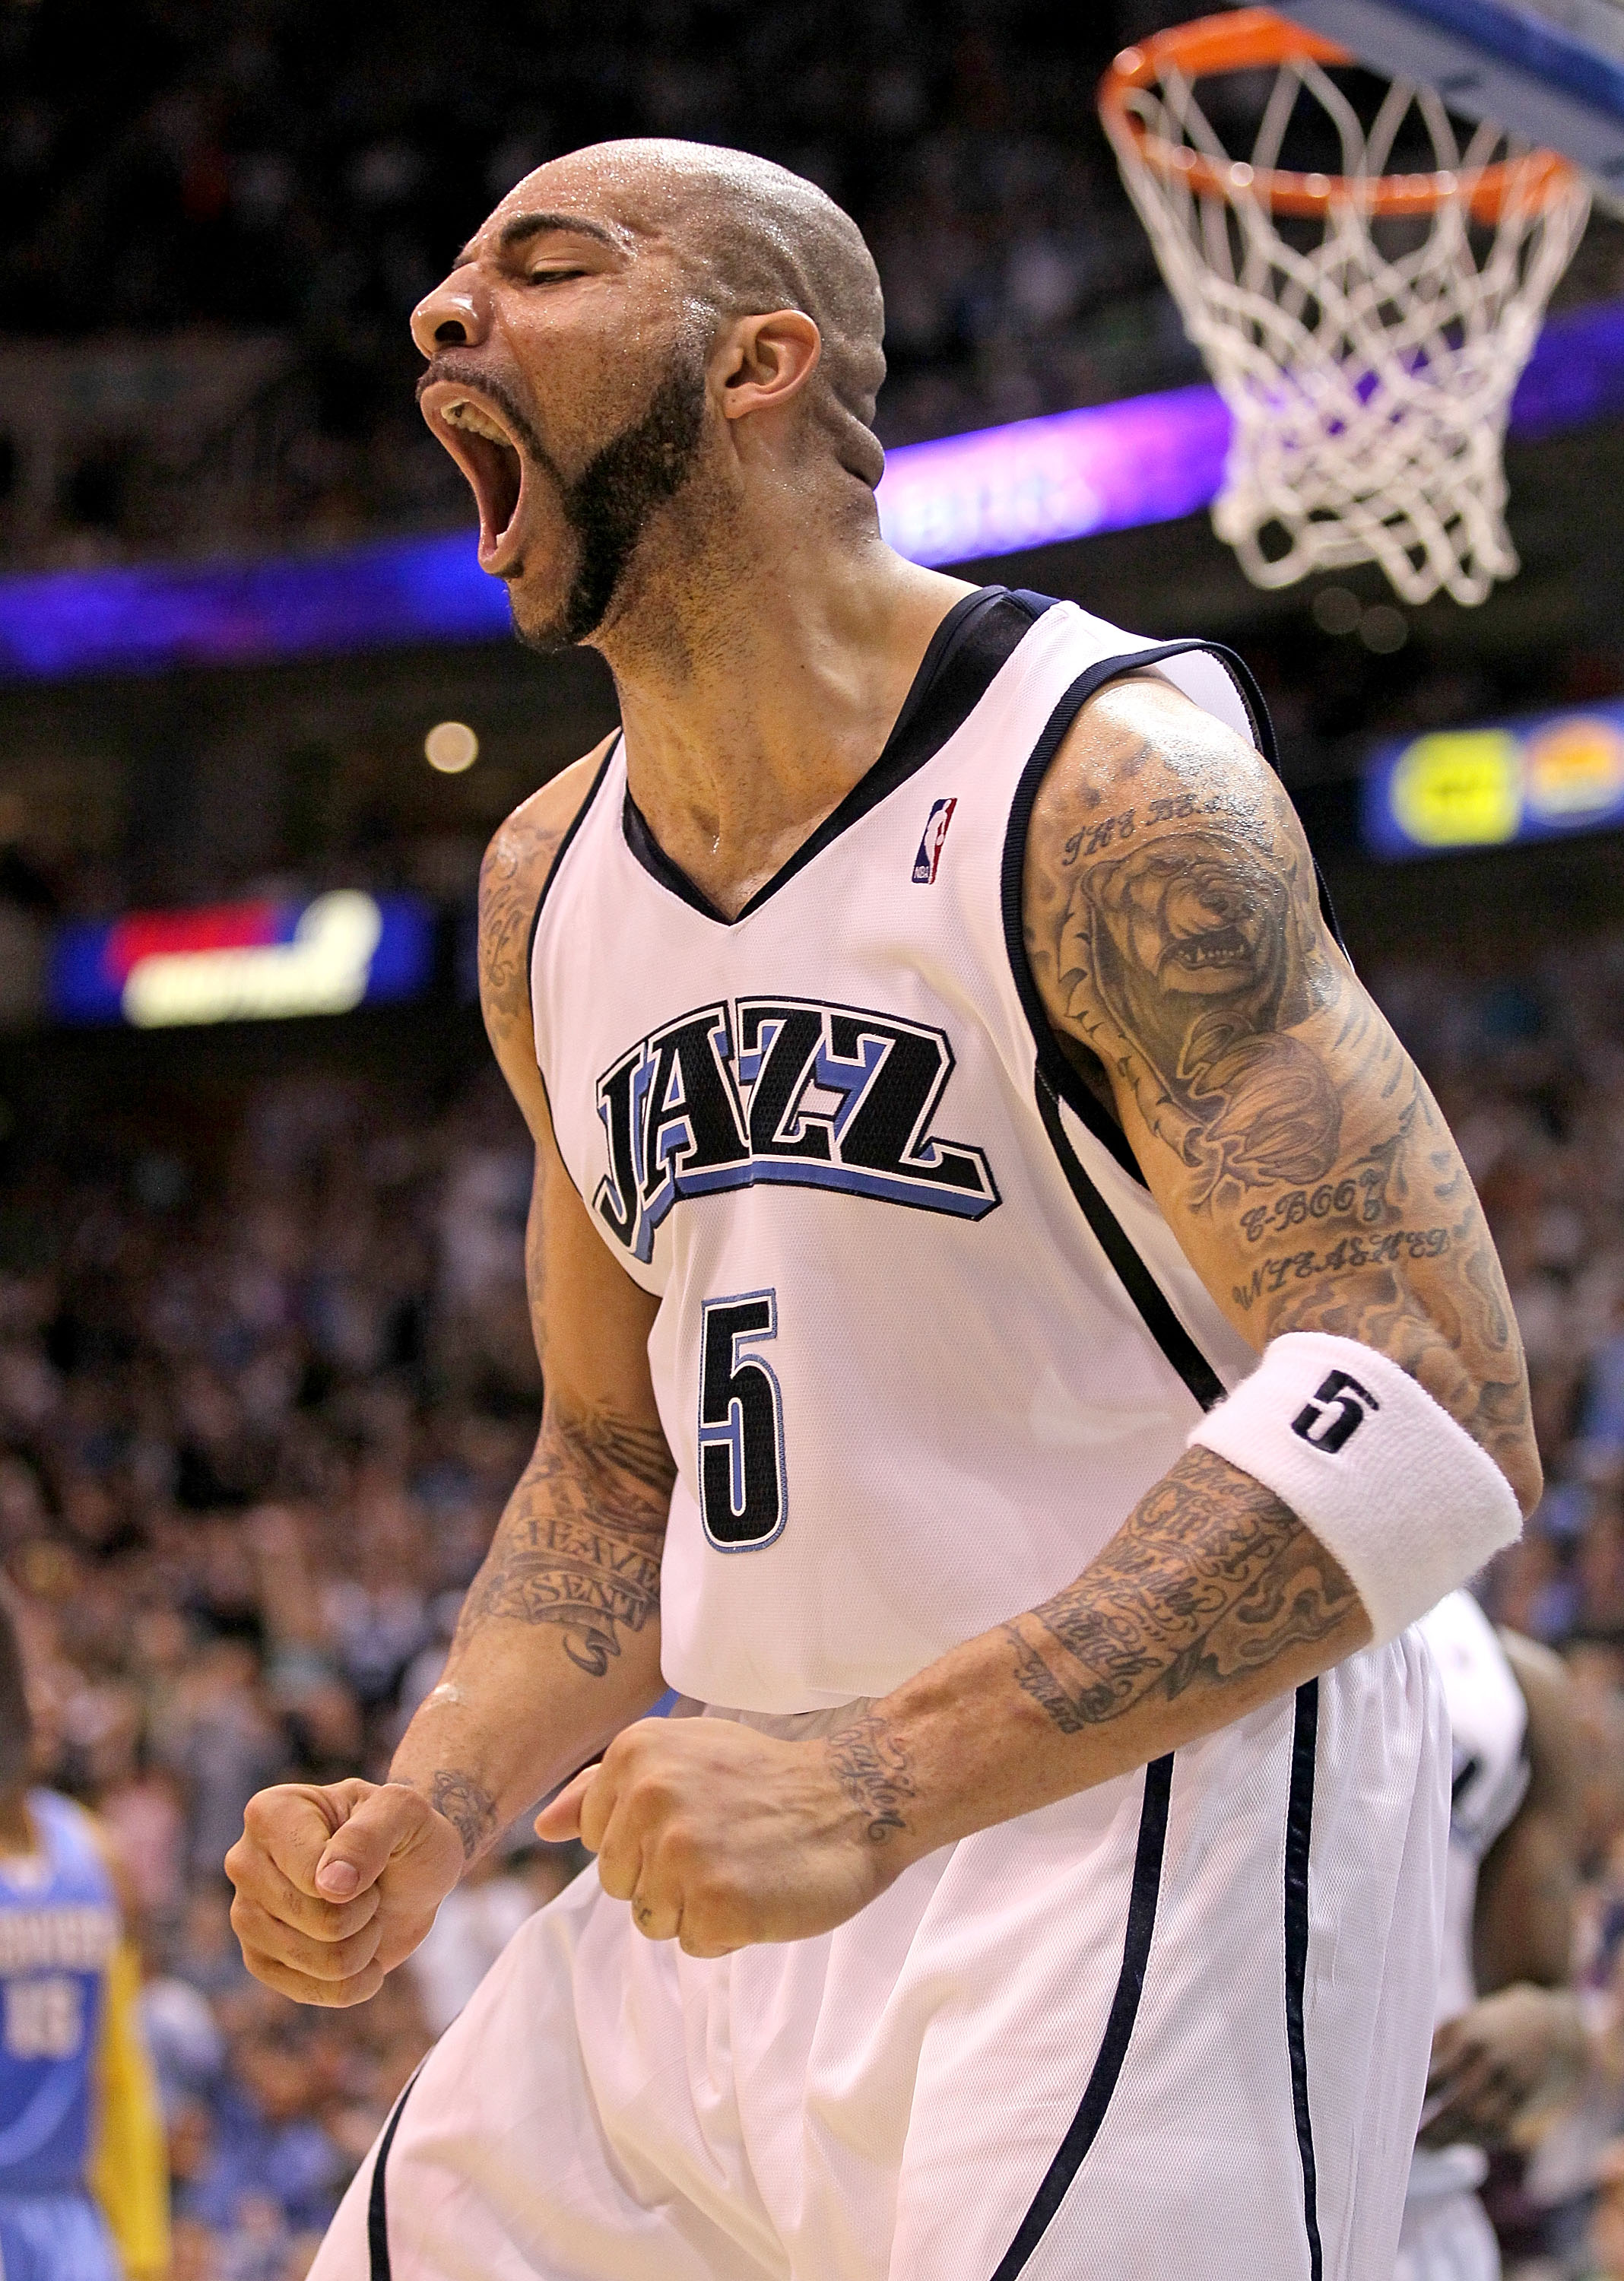 SALT LAKE CITY - APRIL 25:  Carlos Boozer #5 of the Utah Jazz shoots celebrates against the Denver Nuggets during Game Four of the Western Conference Quarterfinals of the 2010 NBA Playoffs at EnergySolutions Arena on April 25, 2010 in Salt Lake City, Utah